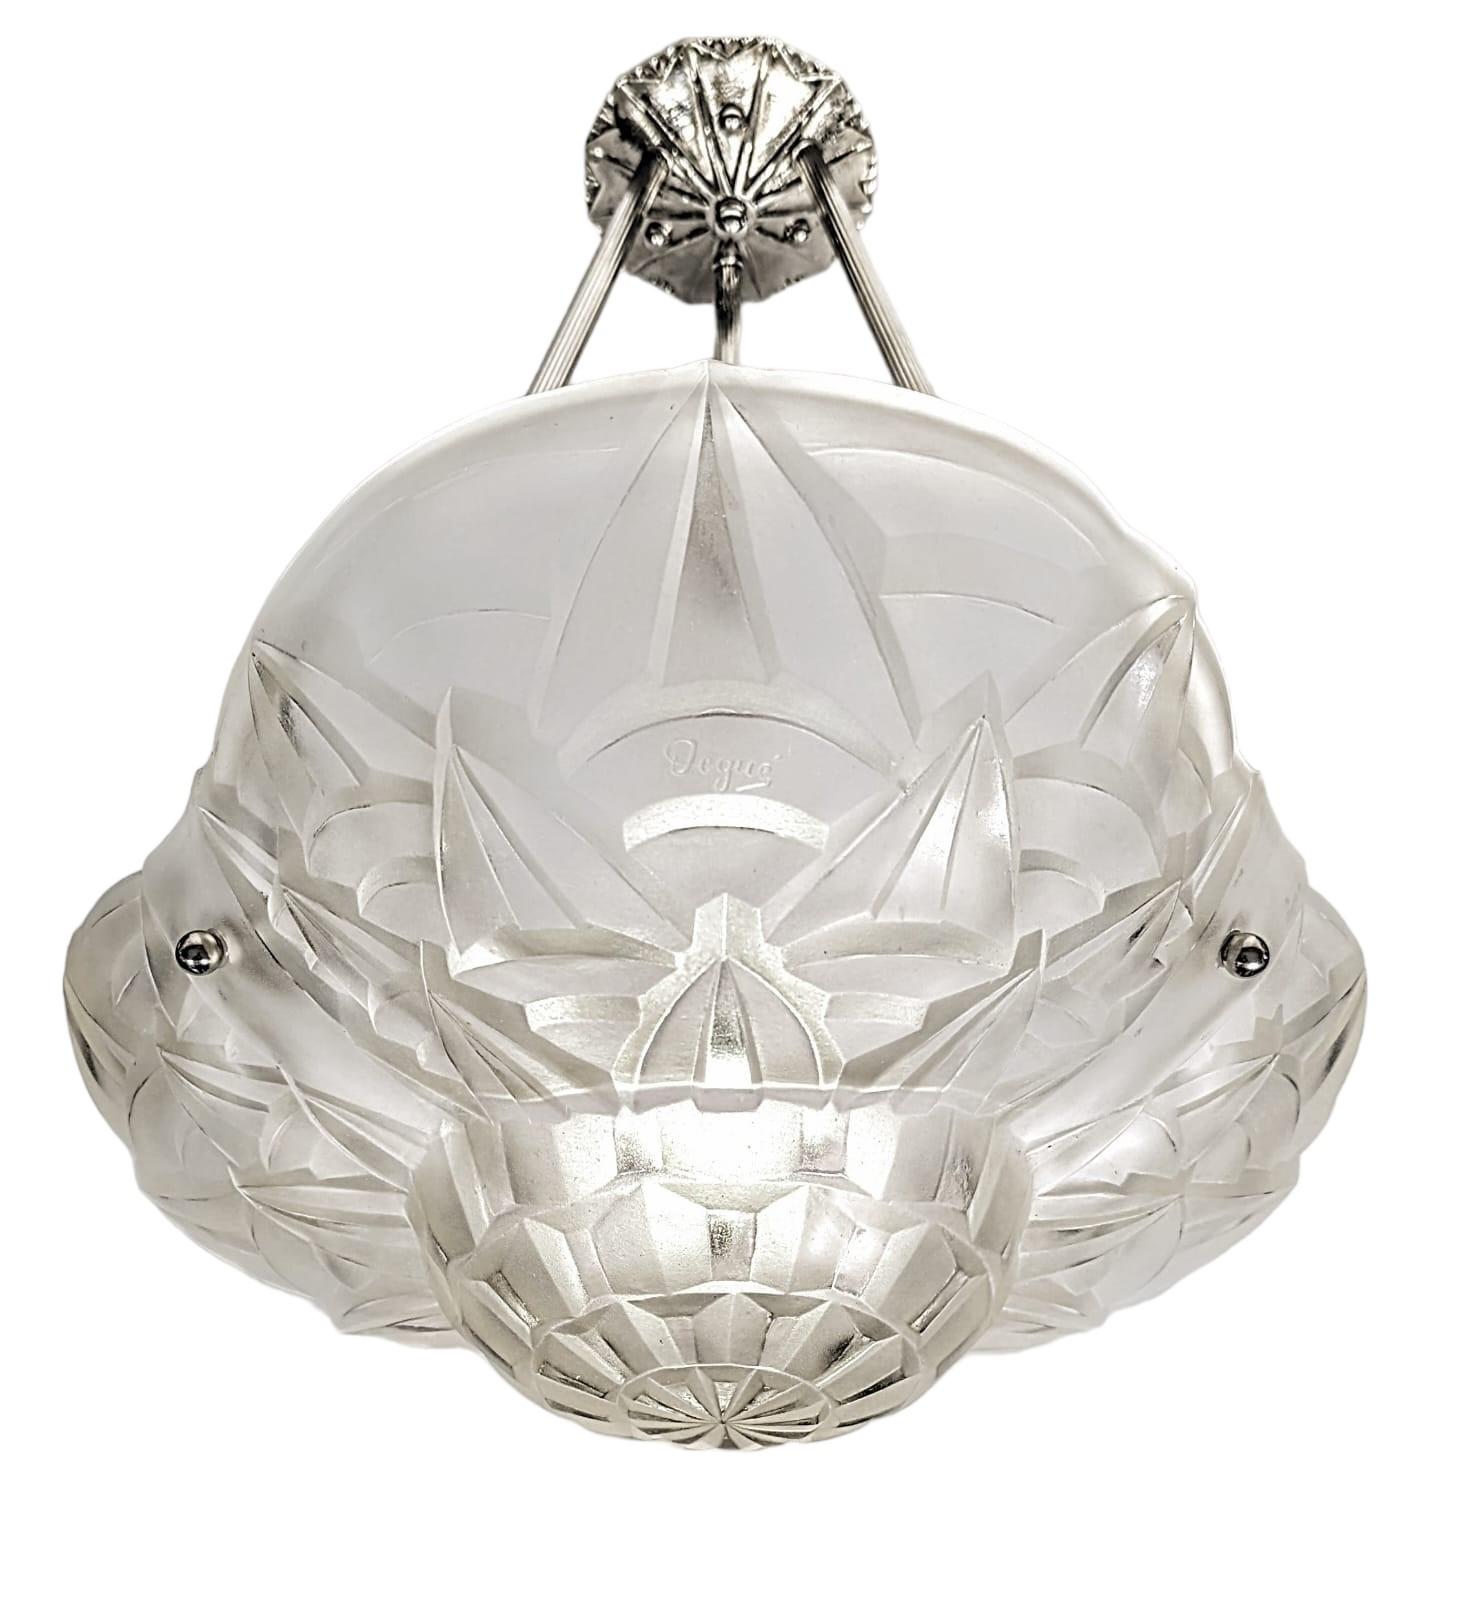 A French Art Deco pendant chandelier signed by the French artist “Degue“. Clear frosted molded glass shade with intricate flowers and geometric polished motif details are held by three ribbed rods with a matching canopy. The fixture has been